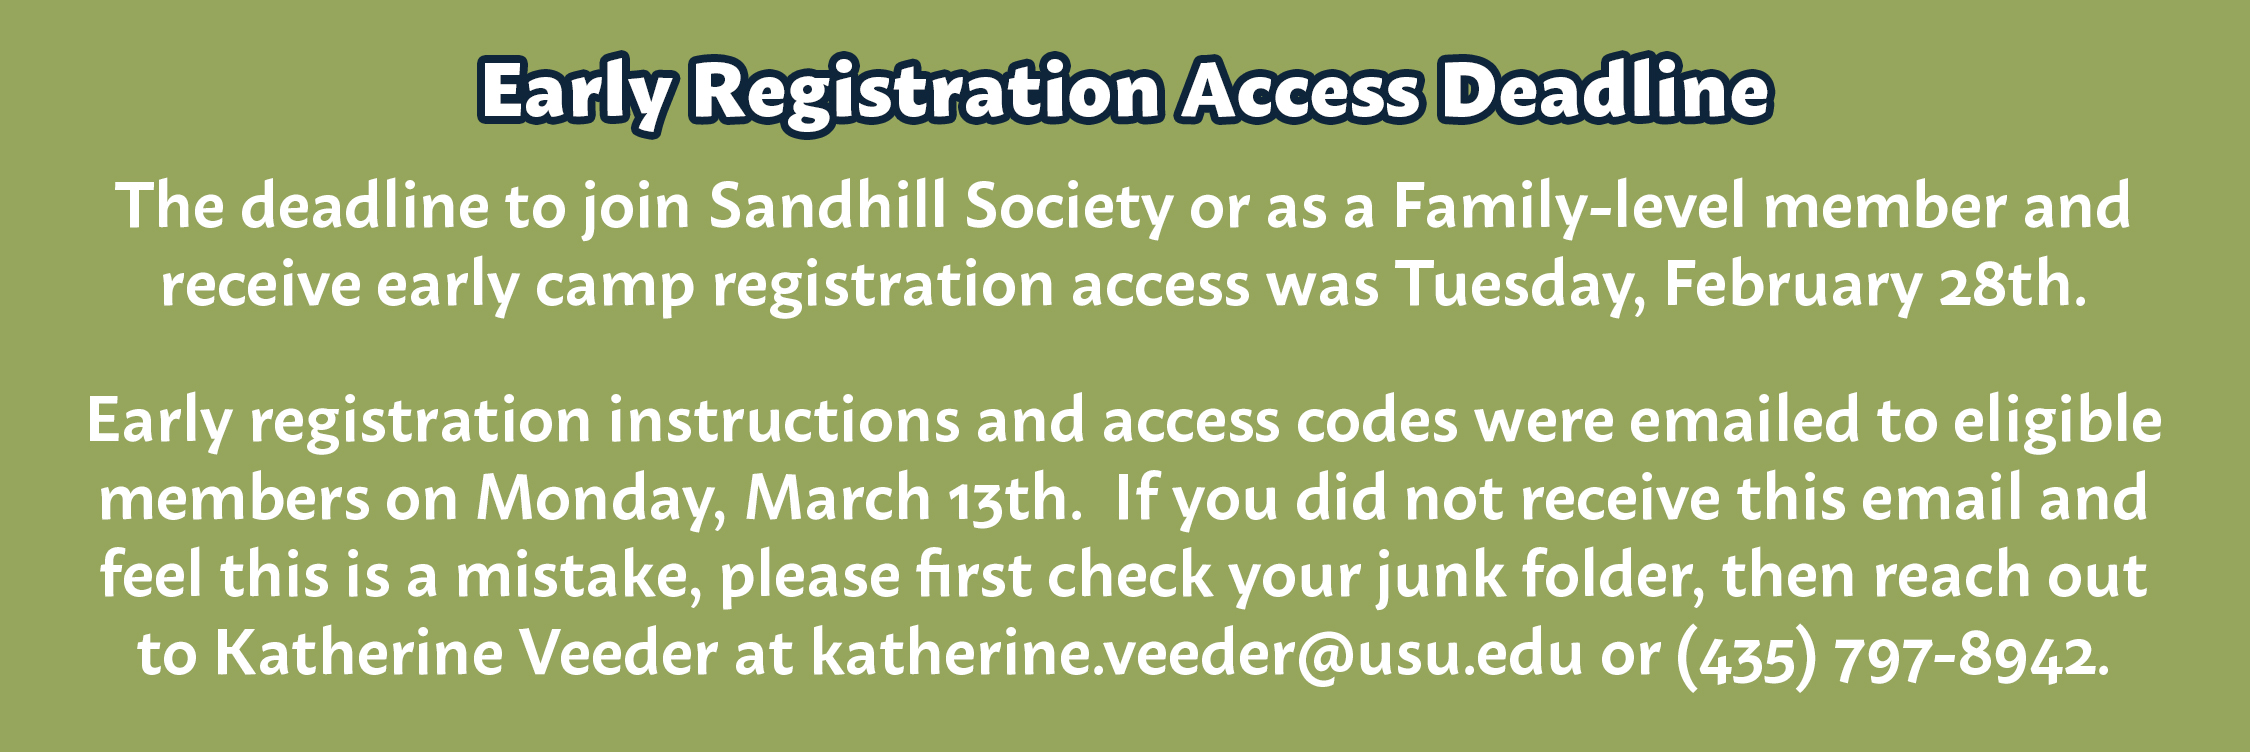 The deadline to join Sandhill Society or as a Family-level member and receive early camp registration access was Tuesday, February 28th.  Early registration instructions and access codes were emailed to eligible members on Monday, March 13th. If you did not receive this email and feel this is a mistake, please first check your junk folder, then reach out to Katherine Veeder at katherine.veeder@usu.edu or (435) 797-8942.